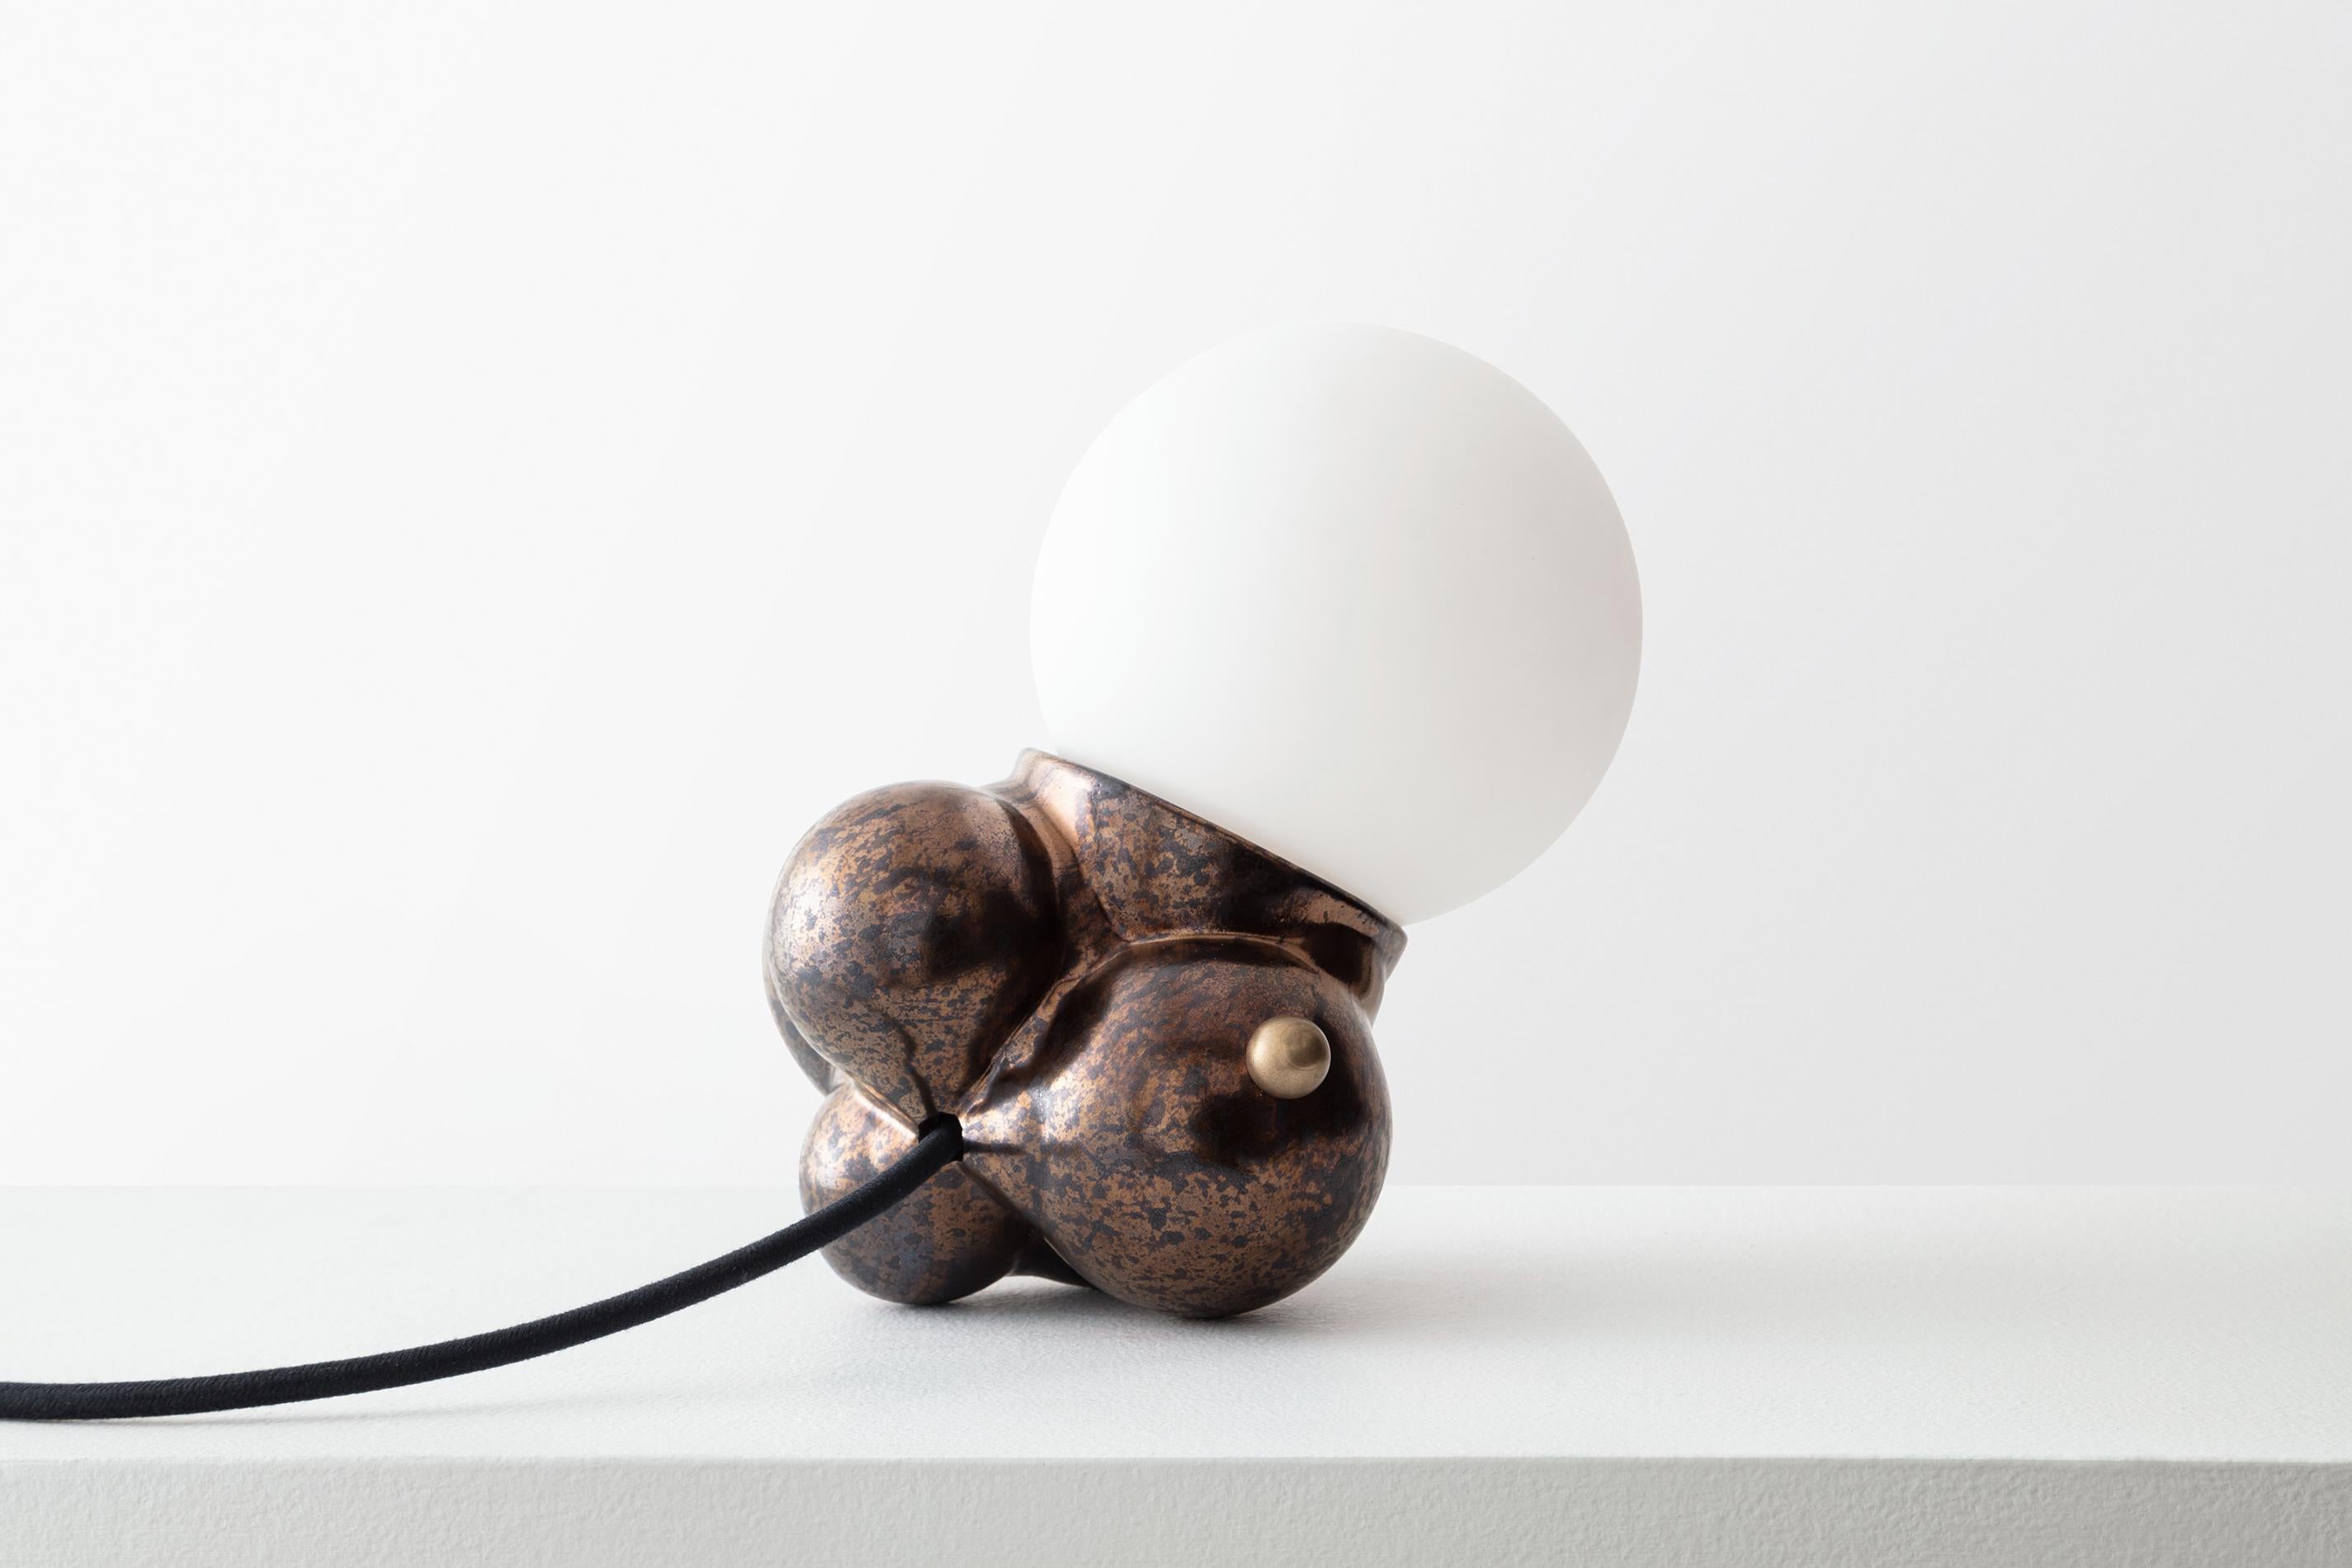 Our Bubbly Lamp Mini is digitally grown to imitate the fractal growth of botryoidal crystals in Nature. Hand crafted by artisans in Peru with unique custom glazes, the lamp features a single bulbs at 6in, fully dimmable with a custom brass dimmer